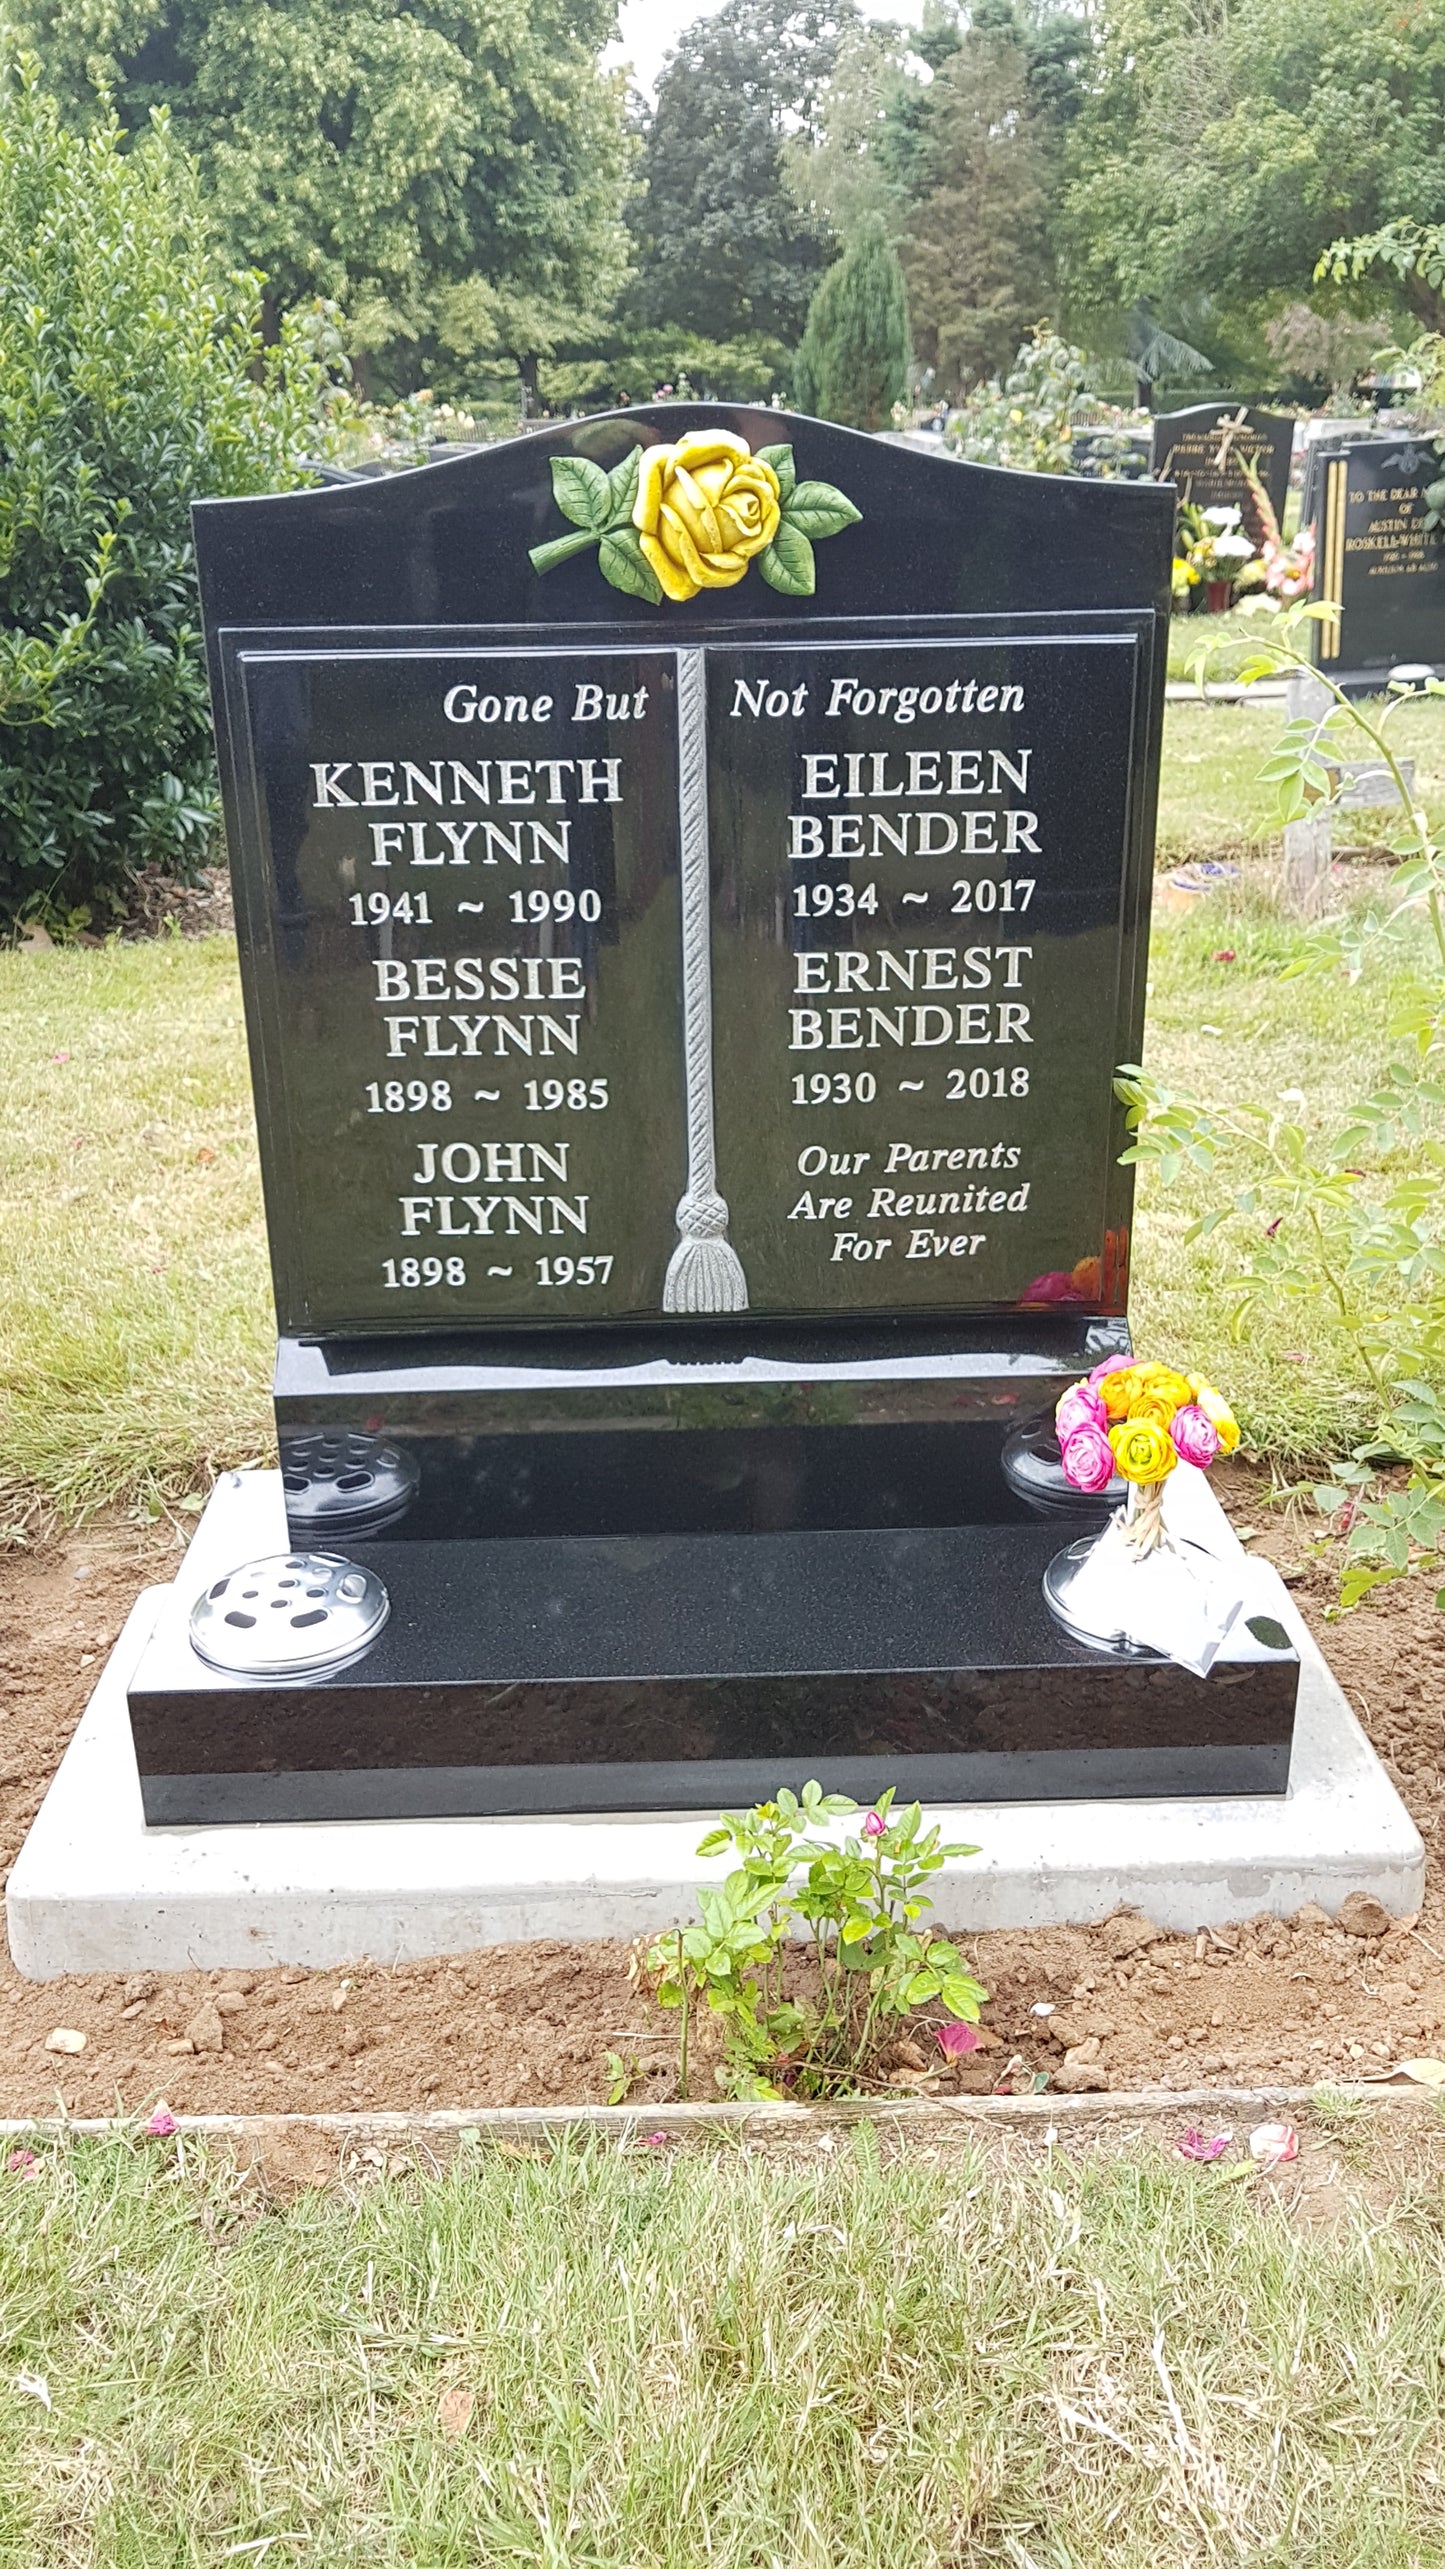 Book Headstone With Carved Rose And Carved Centre Tassel